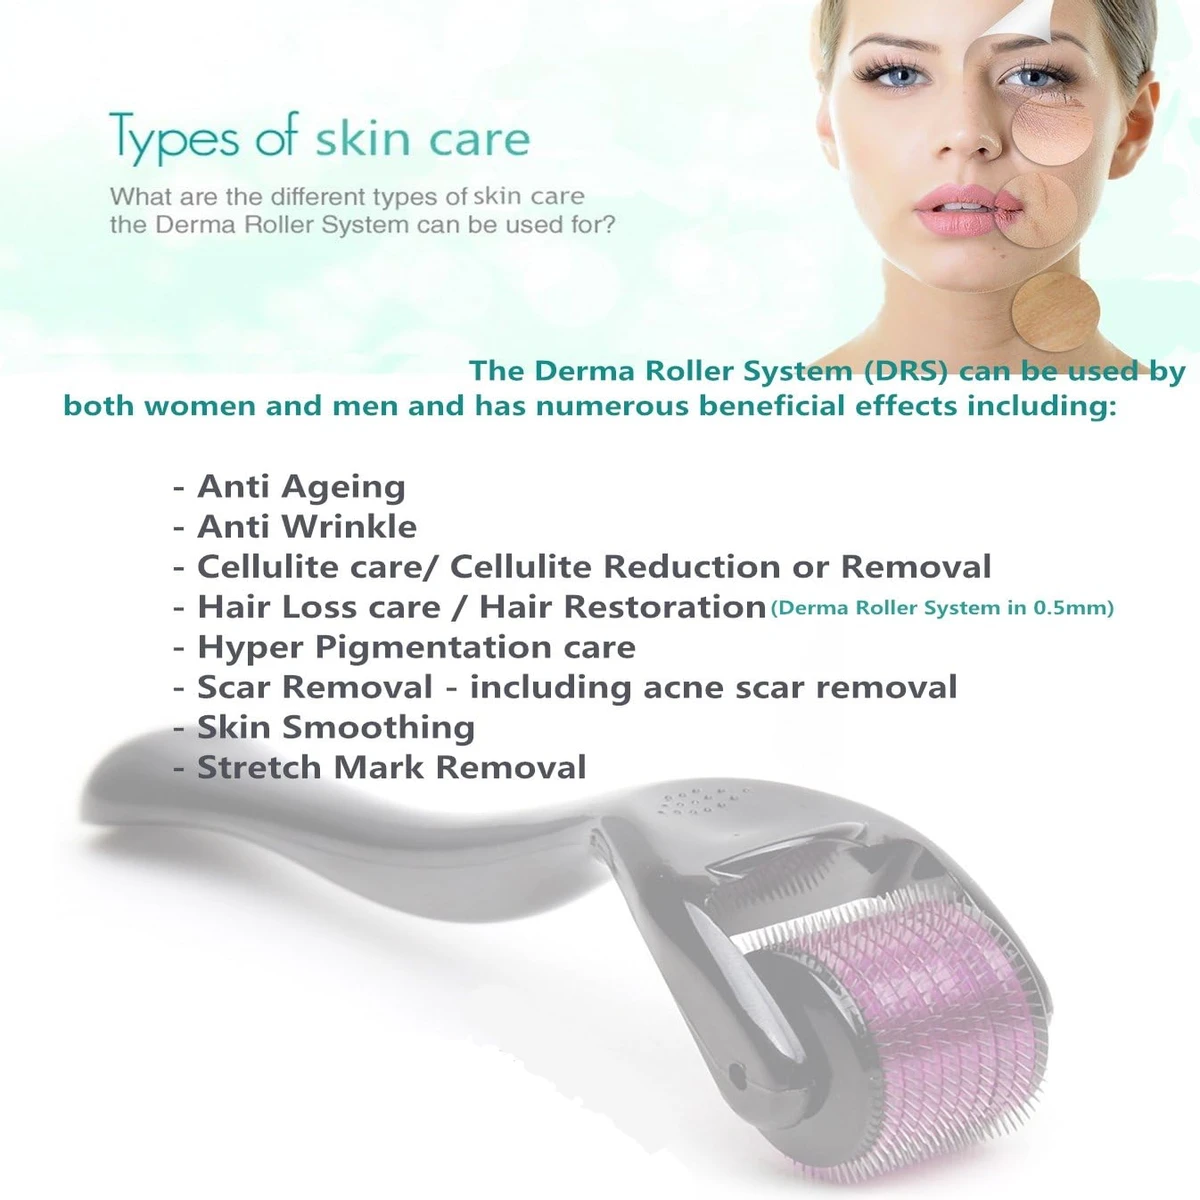 Derma Roller 1mm Cosmetic Needling Instrument For Face Titanium 540 Micro Needles Beauty Massage Tool Home Use Hair Loss Care Stretch Marks Acne Scars and Wrinkles Anti Aging Roller